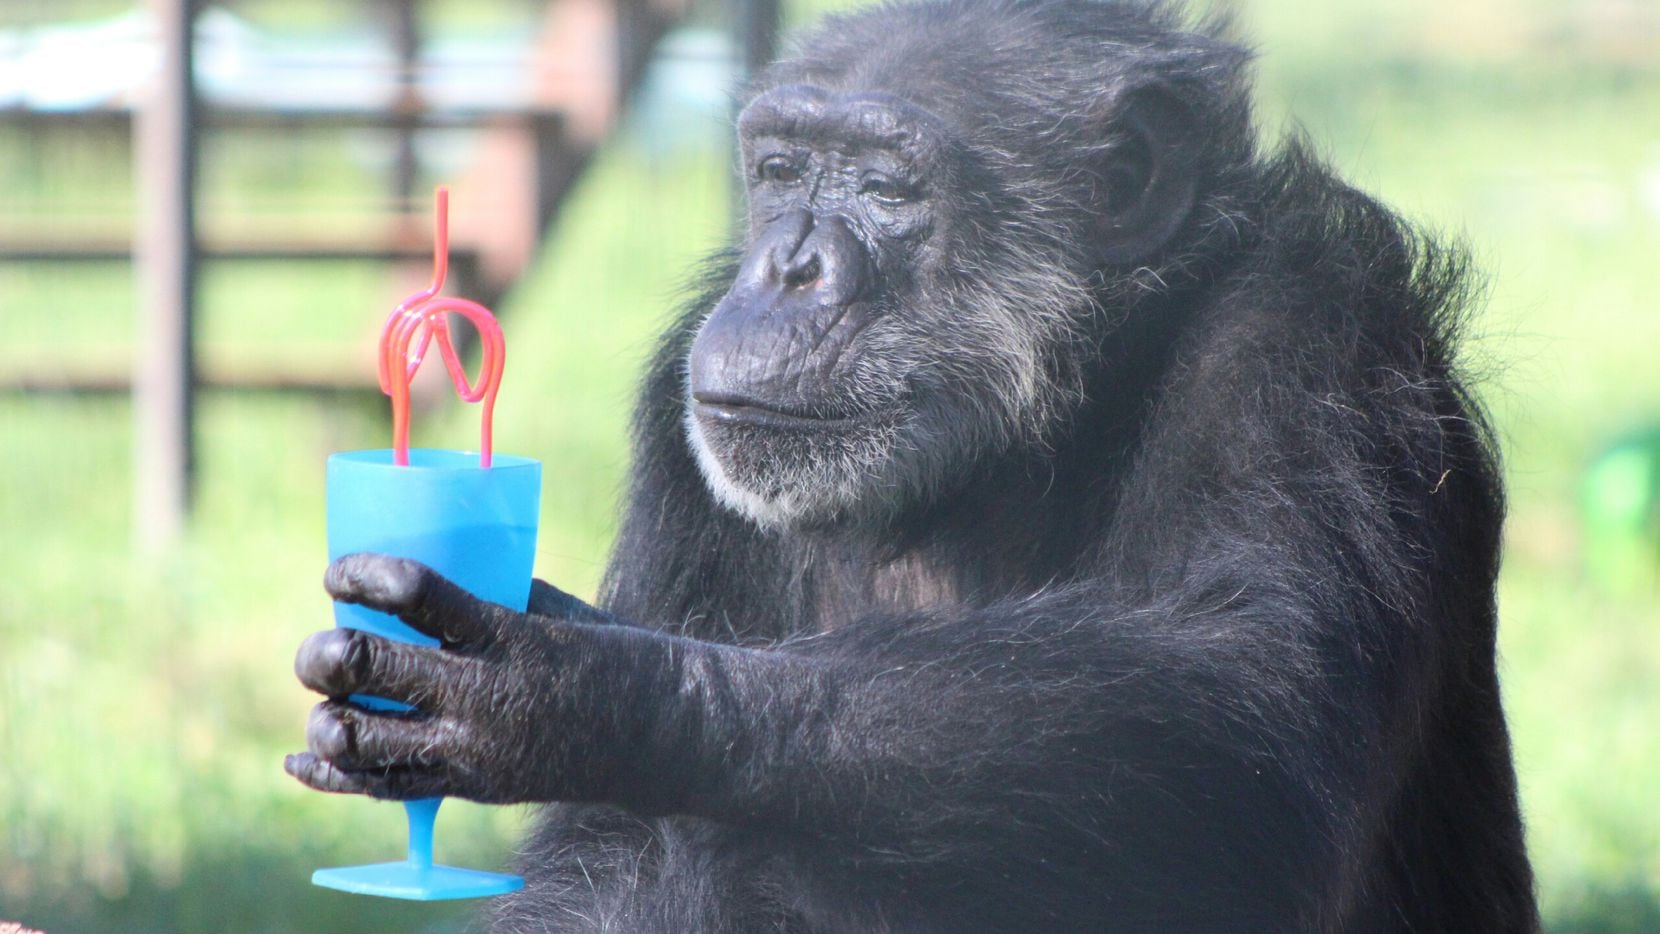 Lulu Belle, a chimpanzee at Cleveland Amory Black Beauty Ranch in Murchison, Texas, drinks...